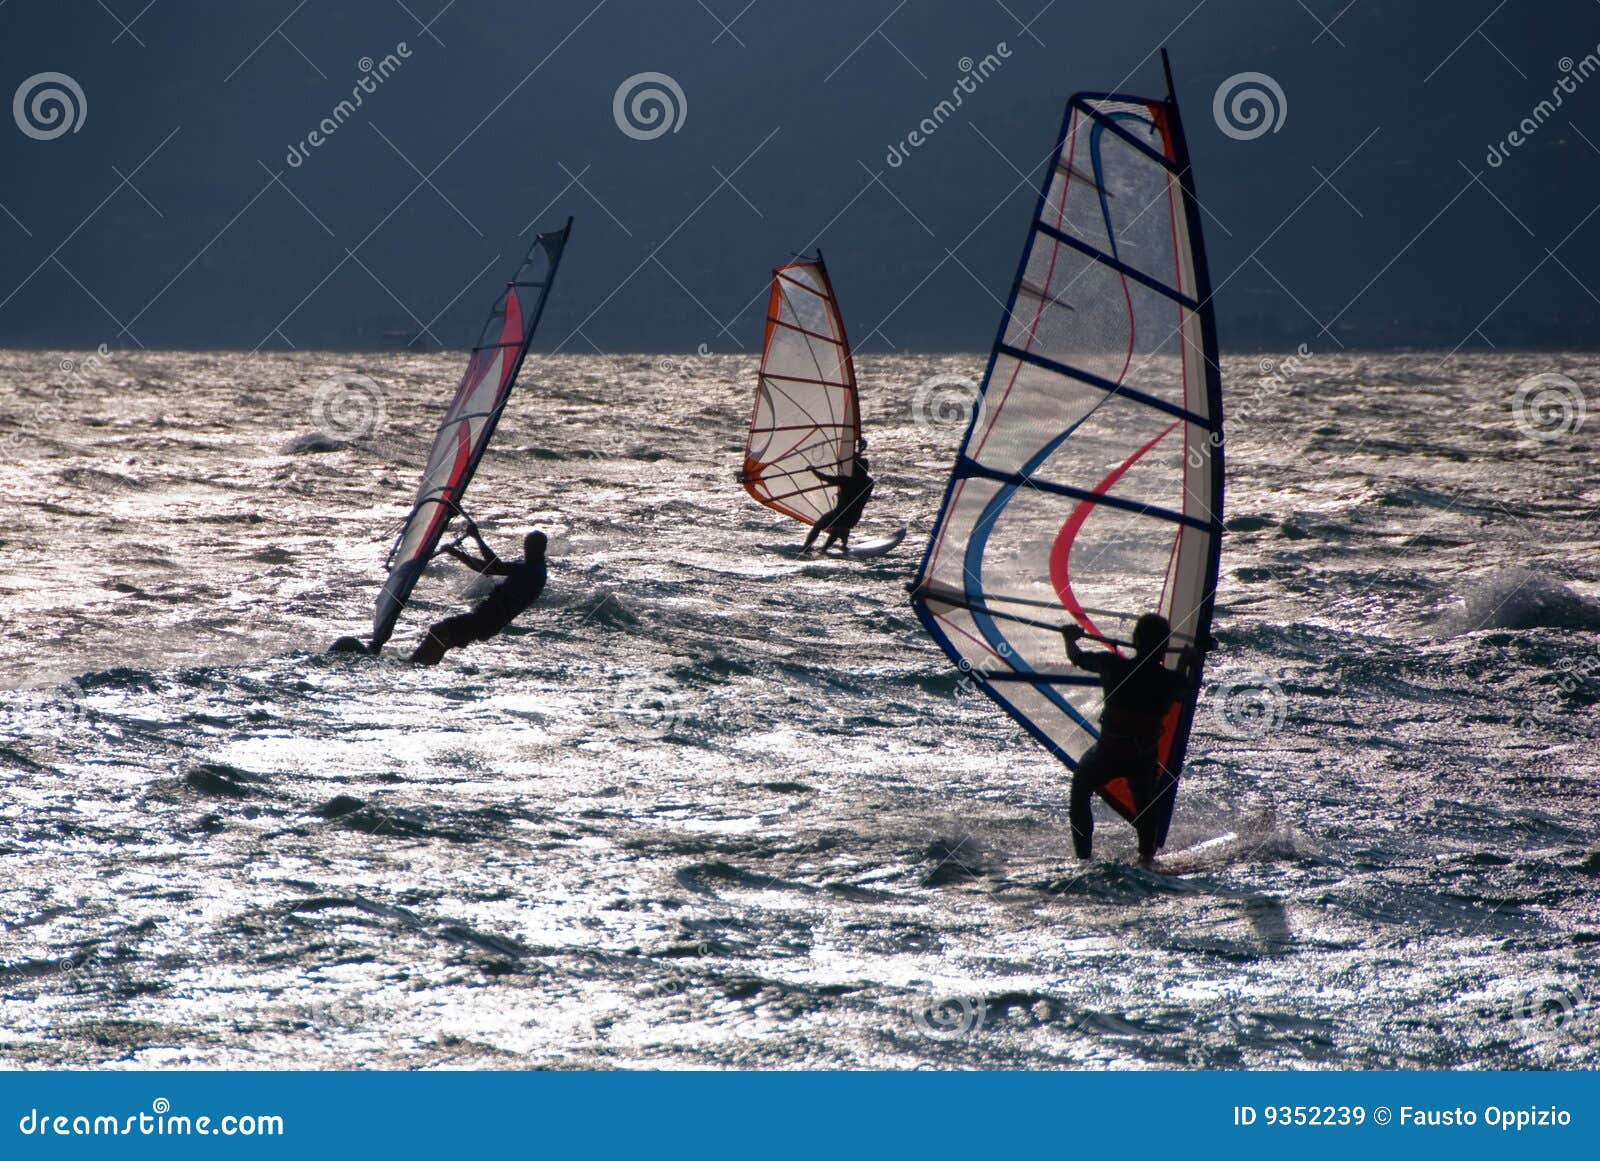 windsurf in the evening